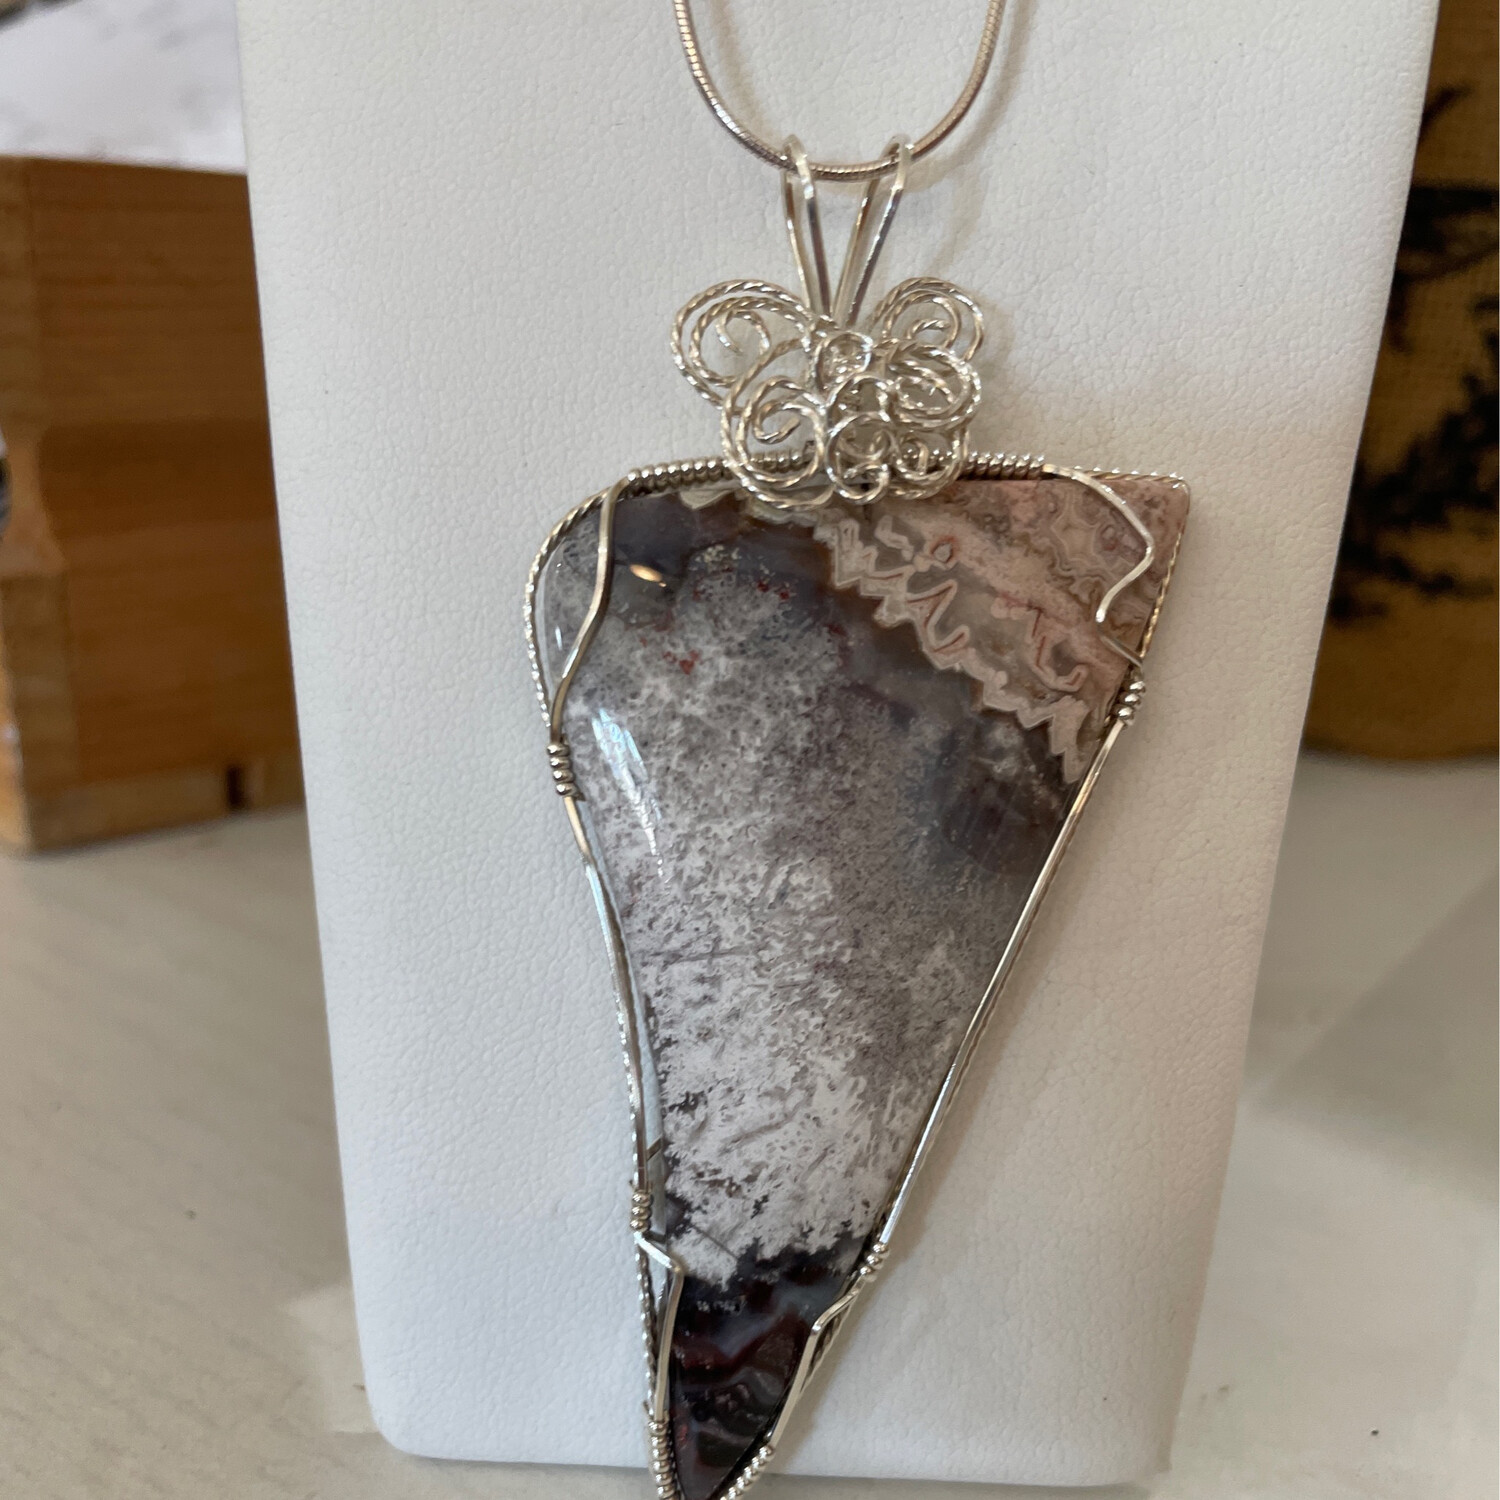 Polished Stone And Sterling Silver. Handmade By Gwen Hertz